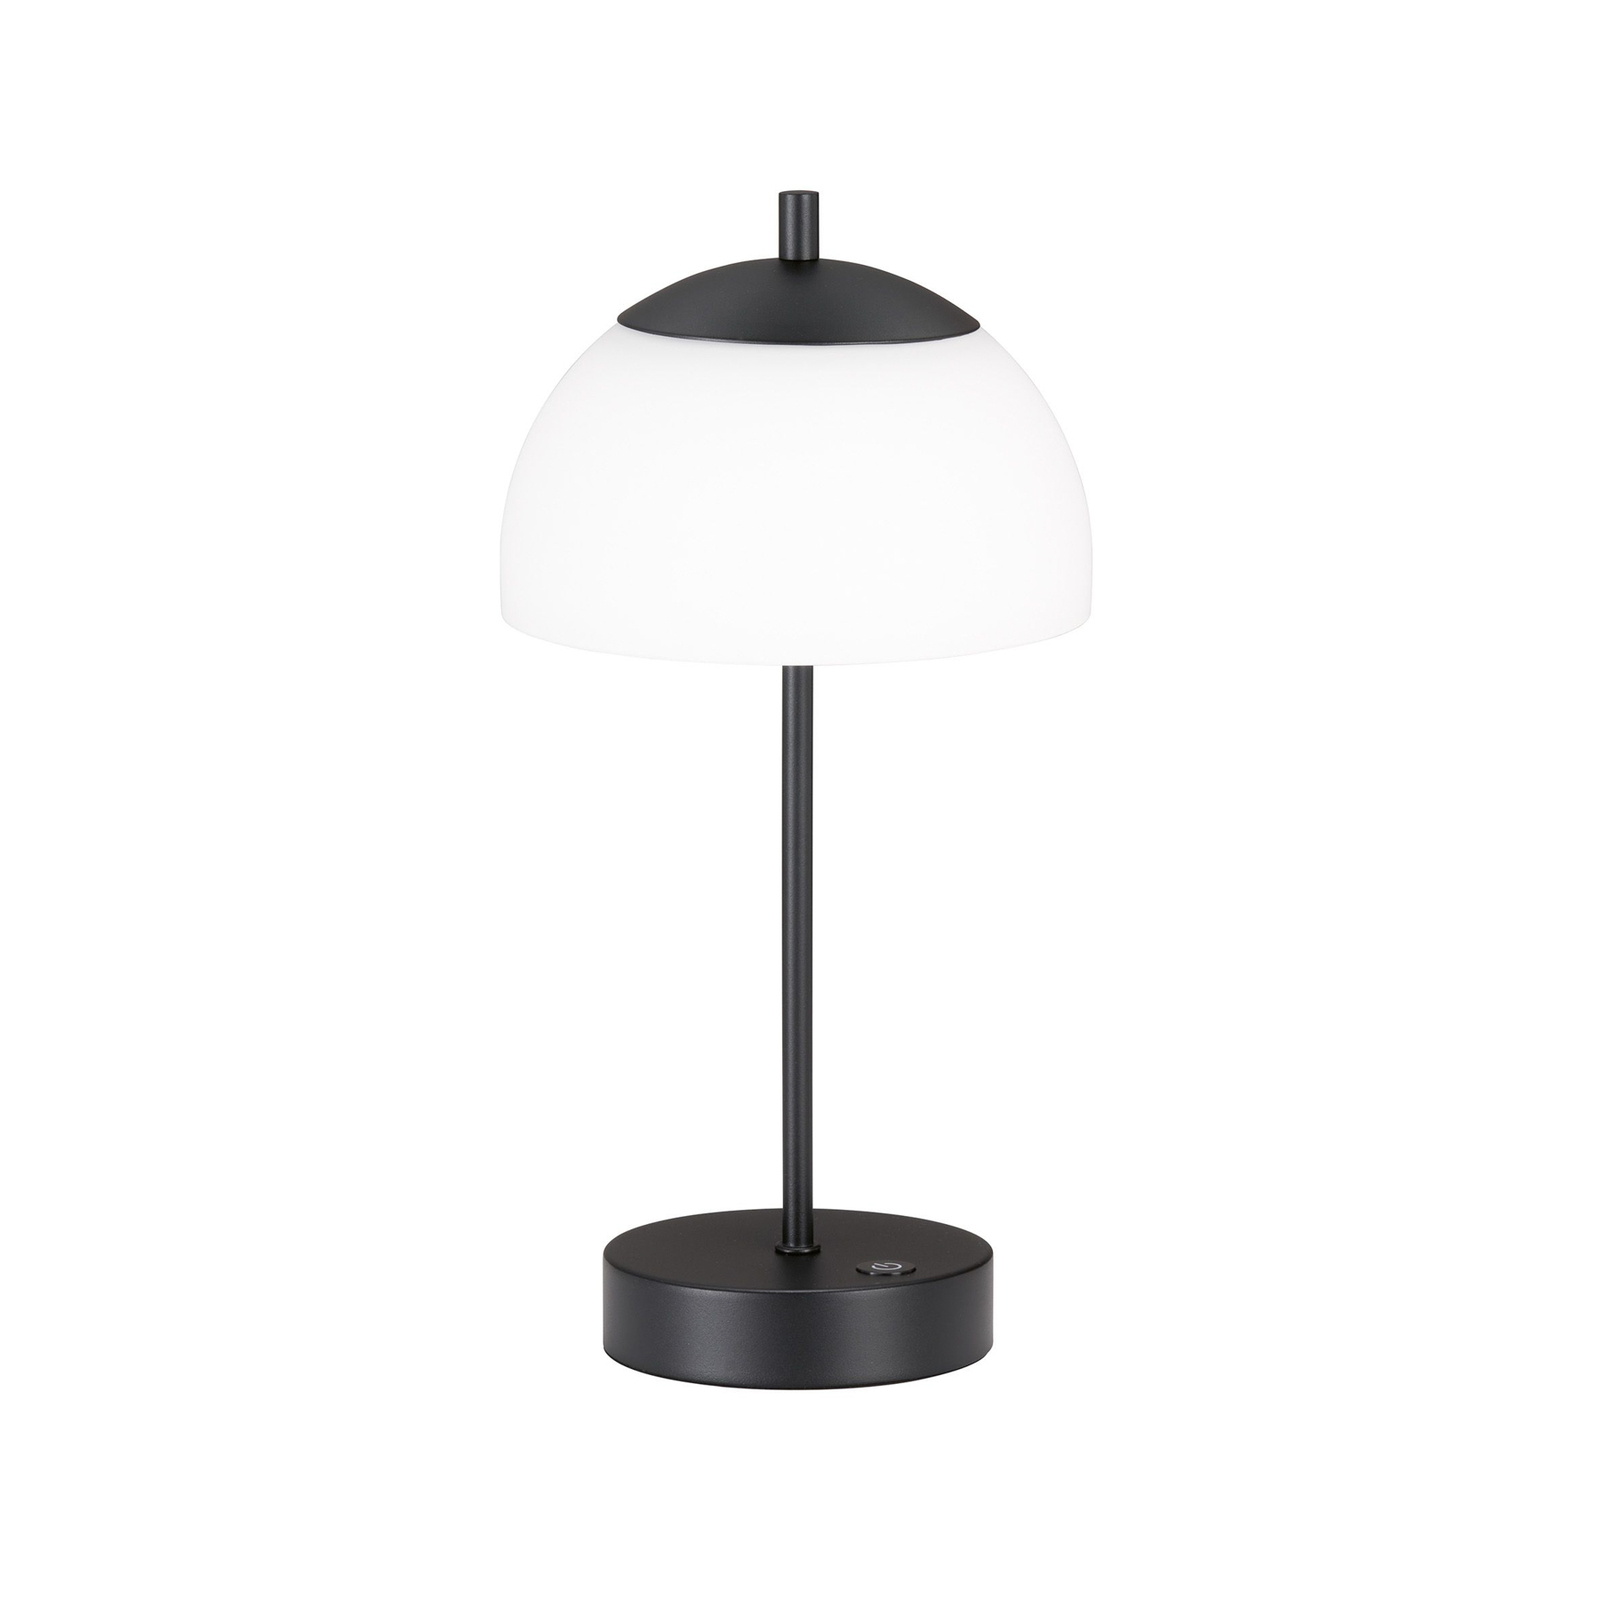 LED table lamp Riva, black, CCT, dimmable, height 35cm